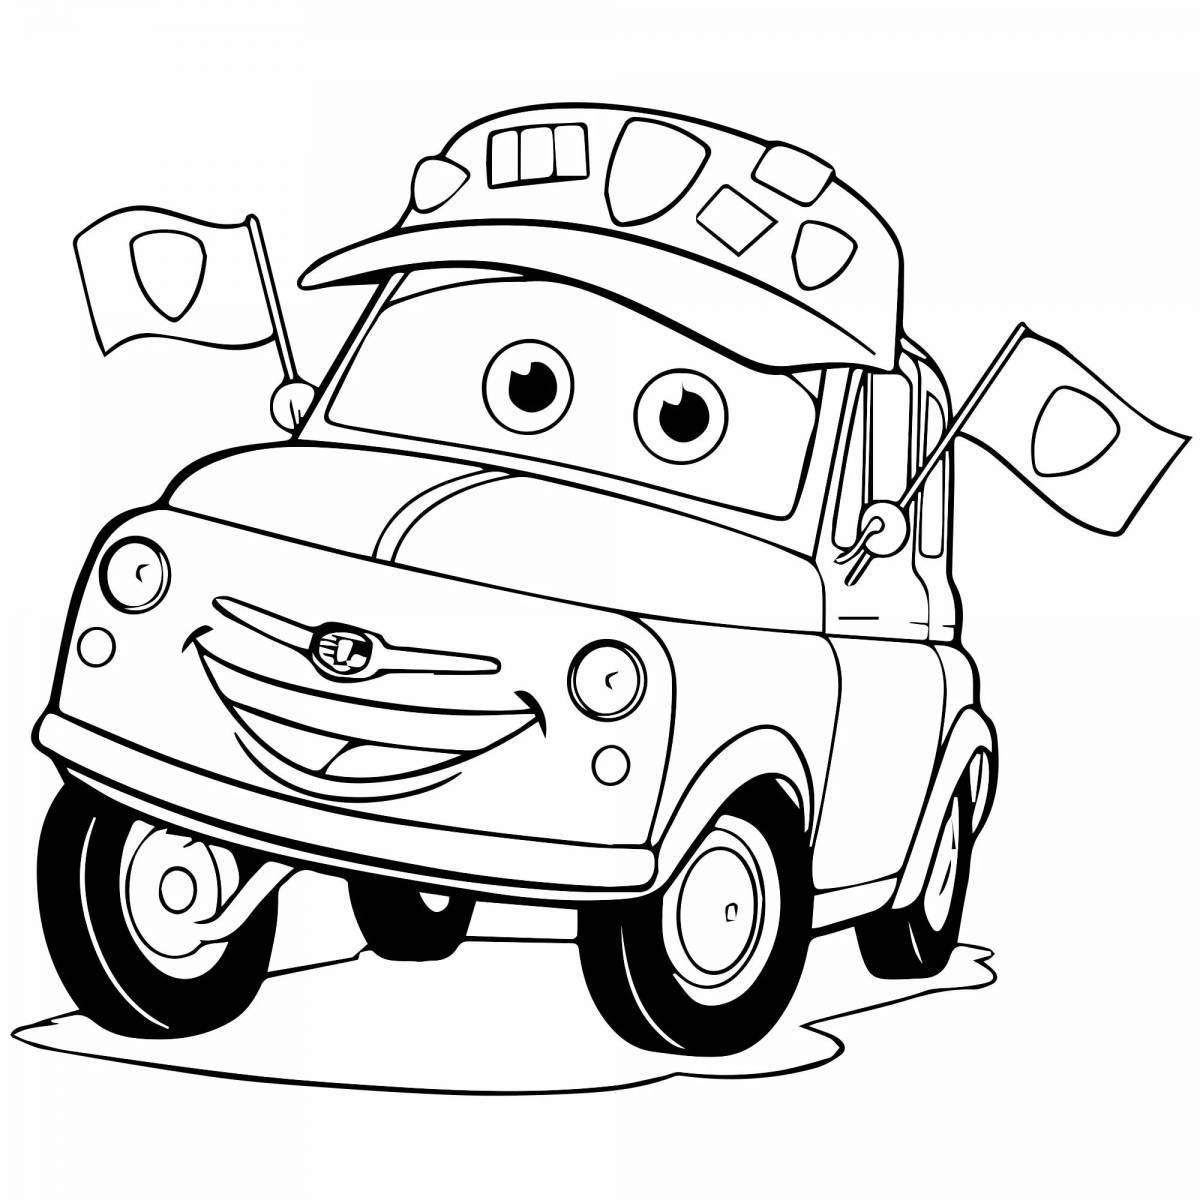 Coloring for colorful cars for children 3-4 years old